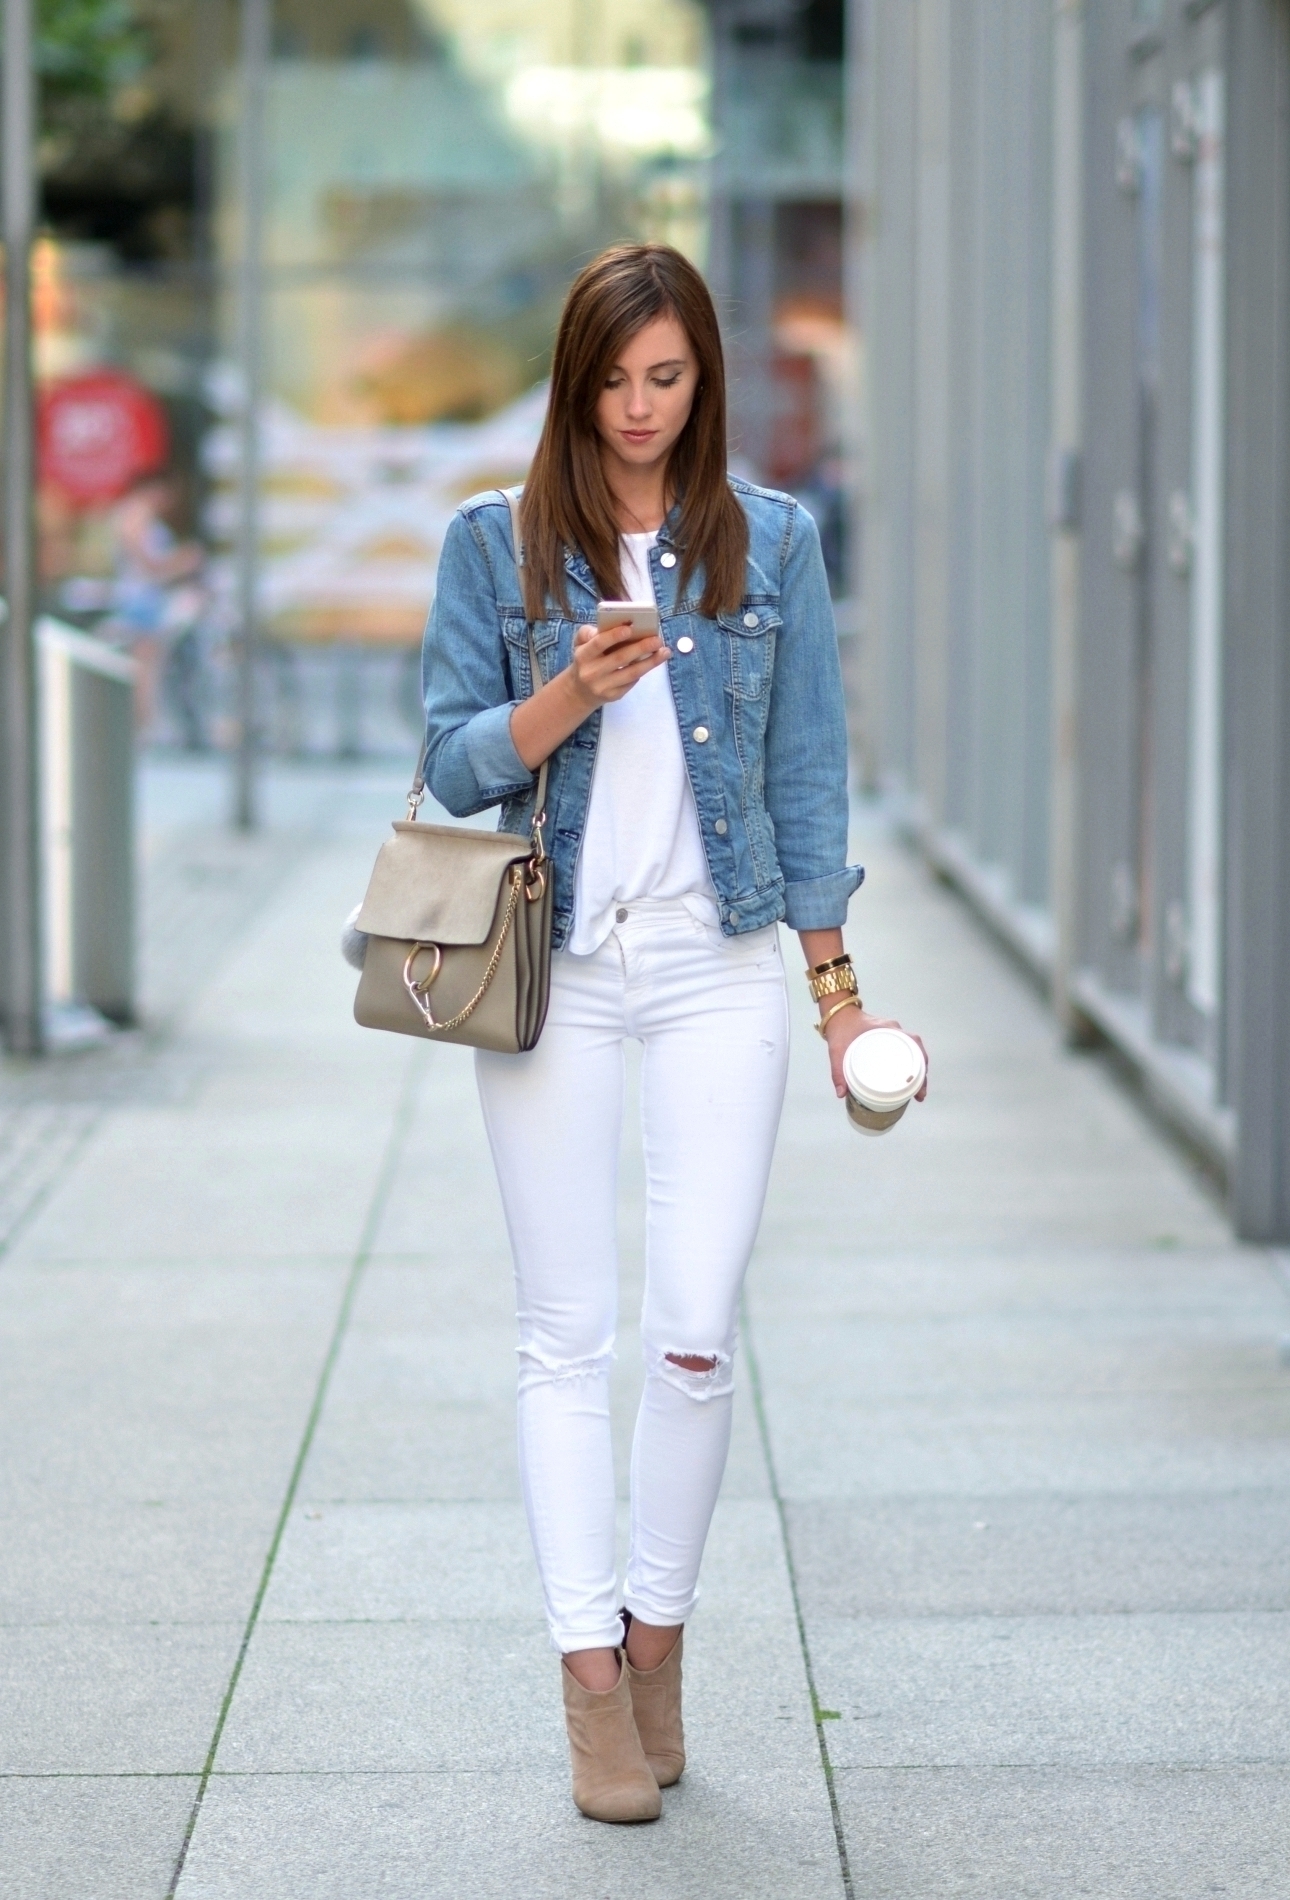 190+ Girls White Denim Jacket Stock Photos, Pictures & Royalty-Free Images  - iStock